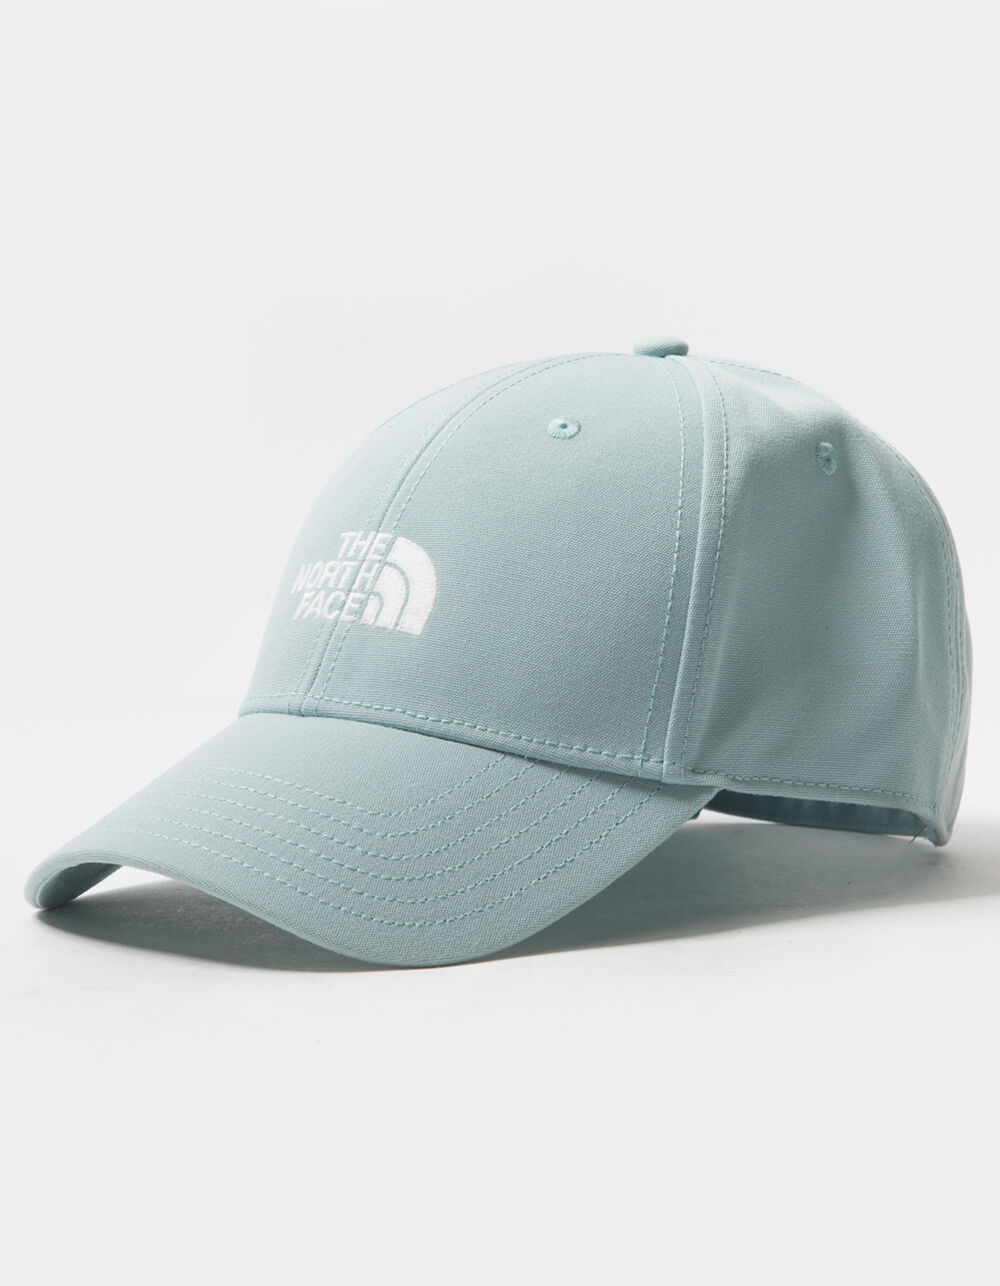 THE NORTH FACE Recycled 66 Classic Mens Strapback Hat - BLUE | Tillys